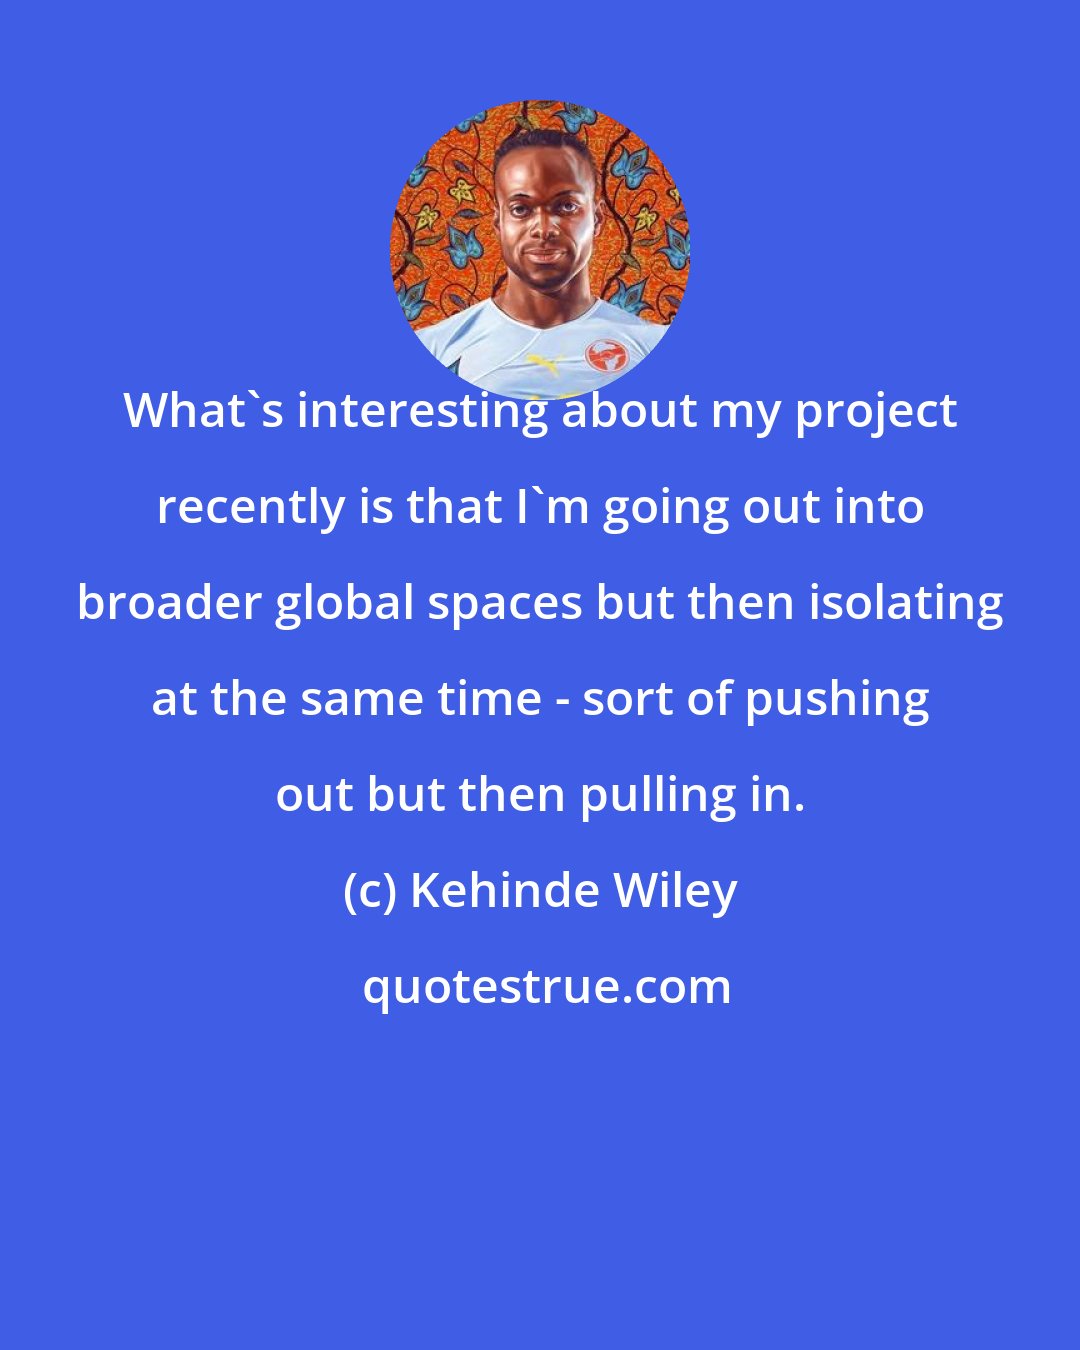 Kehinde Wiley: What's interesting about my project recently is that I'm going out into broader global spaces but then isolating at the same time - sort of pushing out but then pulling in.